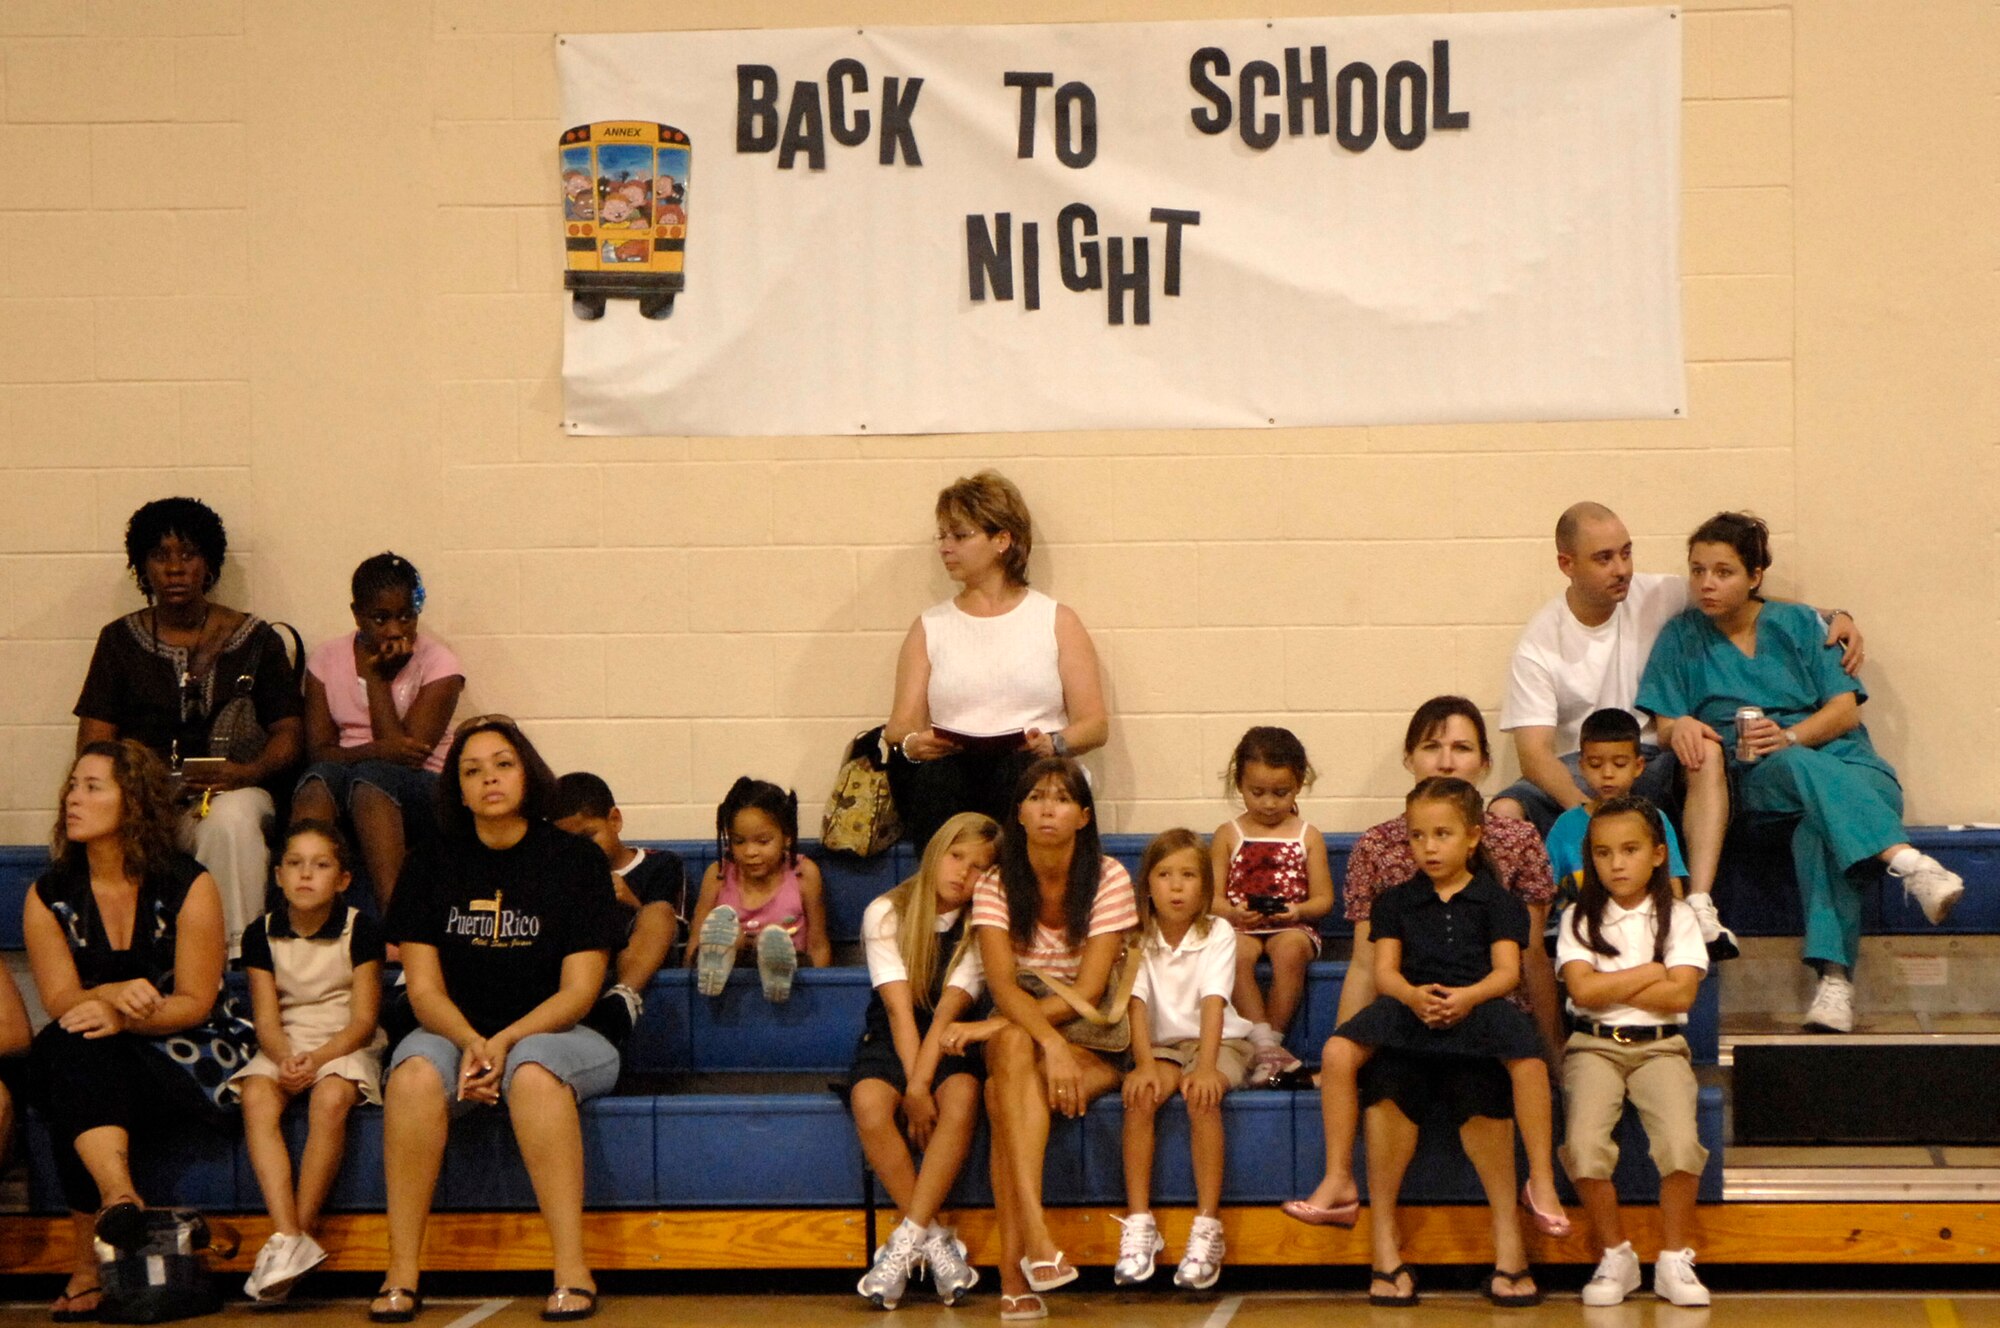 BARKSDALE AIR FORCE BASE, La. - Parents and children listen to opening remarks during a back to school event held at the youth center here July 31. (U.S. Air Force photo by Airman 1st Class Joanna M. Kresge)